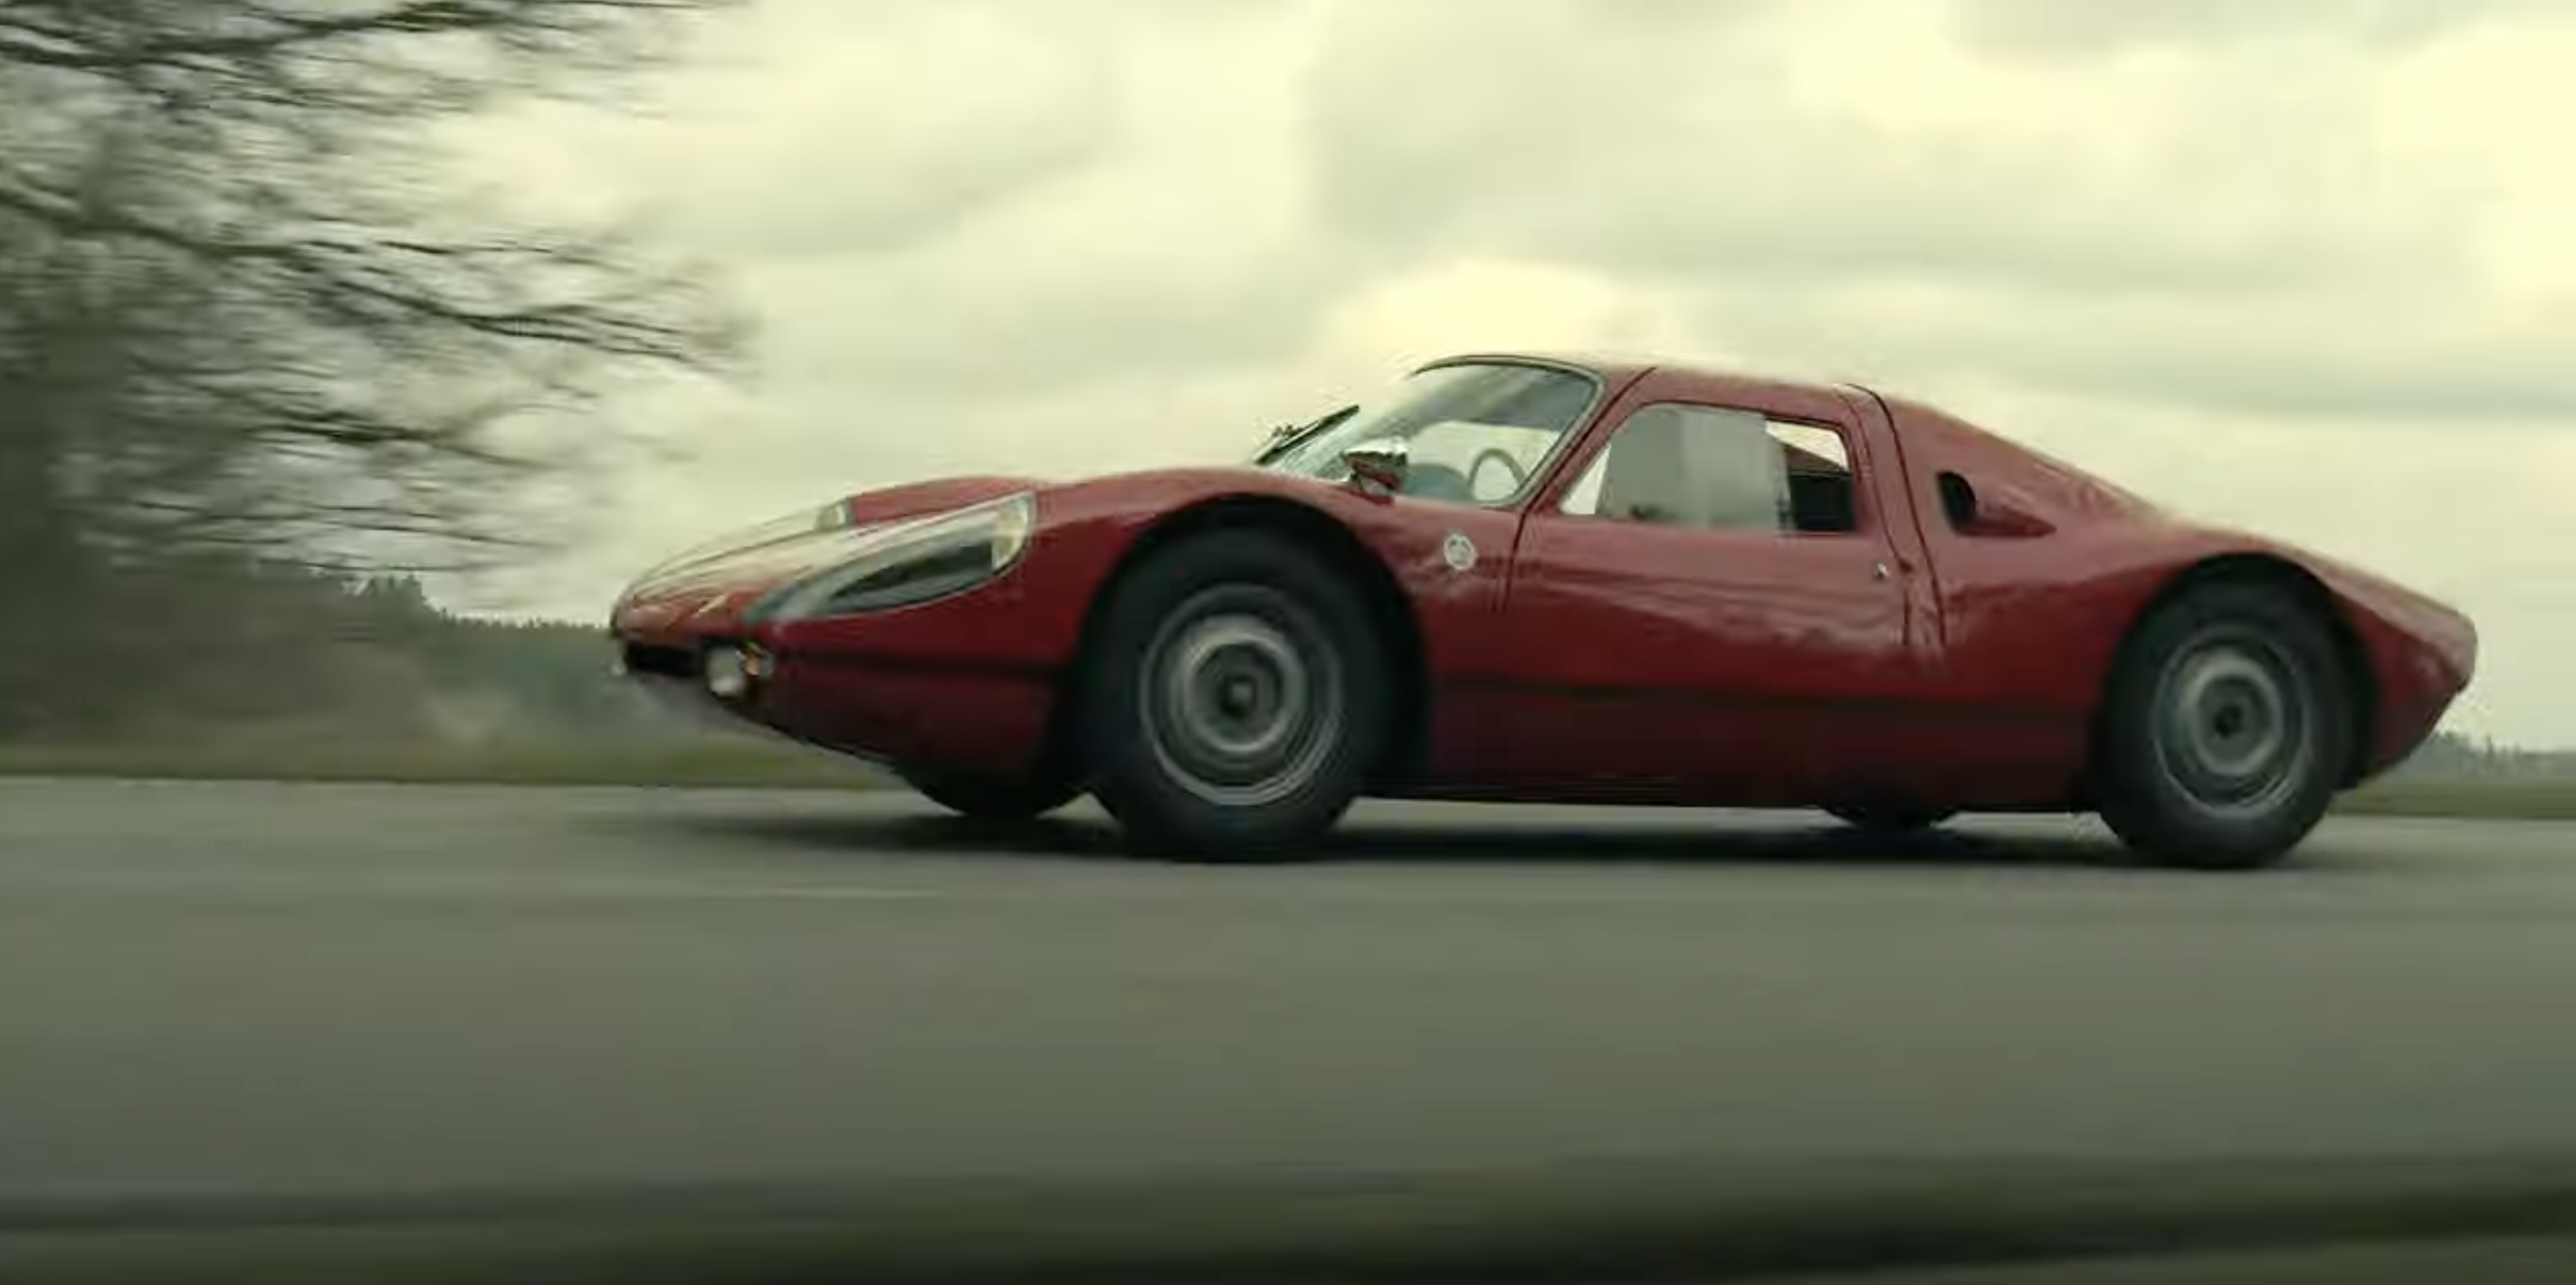 The Porsche 904 Proves That 4-Cylinders Are Plenty